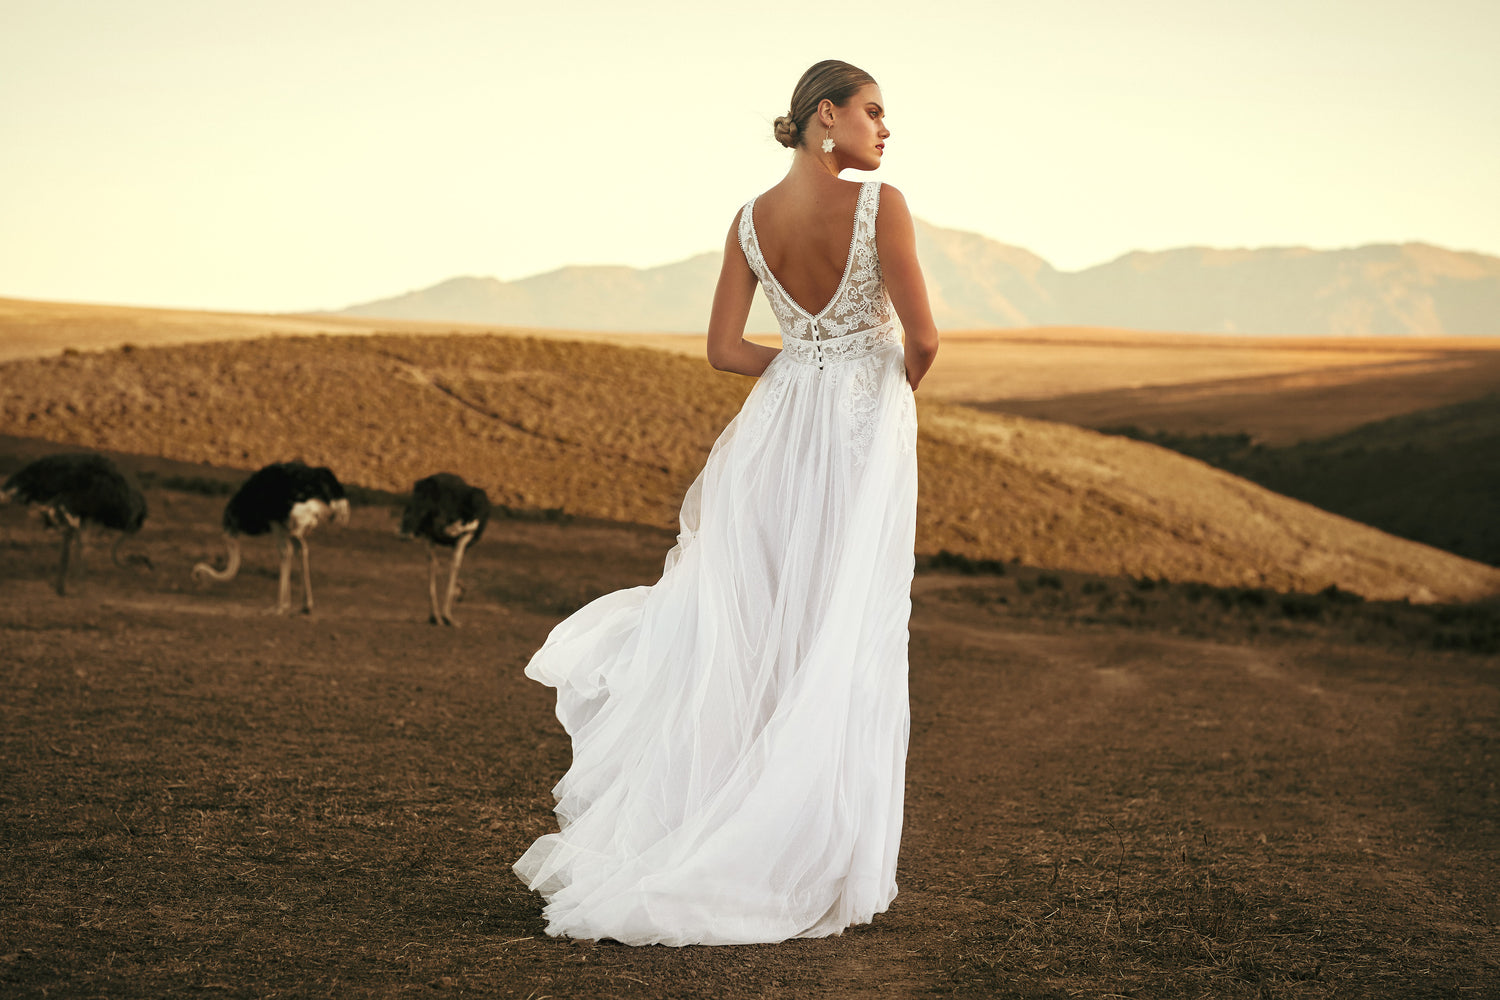 A woman stands on a hill top with a wide landscape, hills and two ostriches ahead of her. The woman is wearing a beautiful white, floral, flowing, long, deep V backline. Her hair is tied into a neat low bun and she is wearing drop floral earrings. The sun is starting to set in the distance.